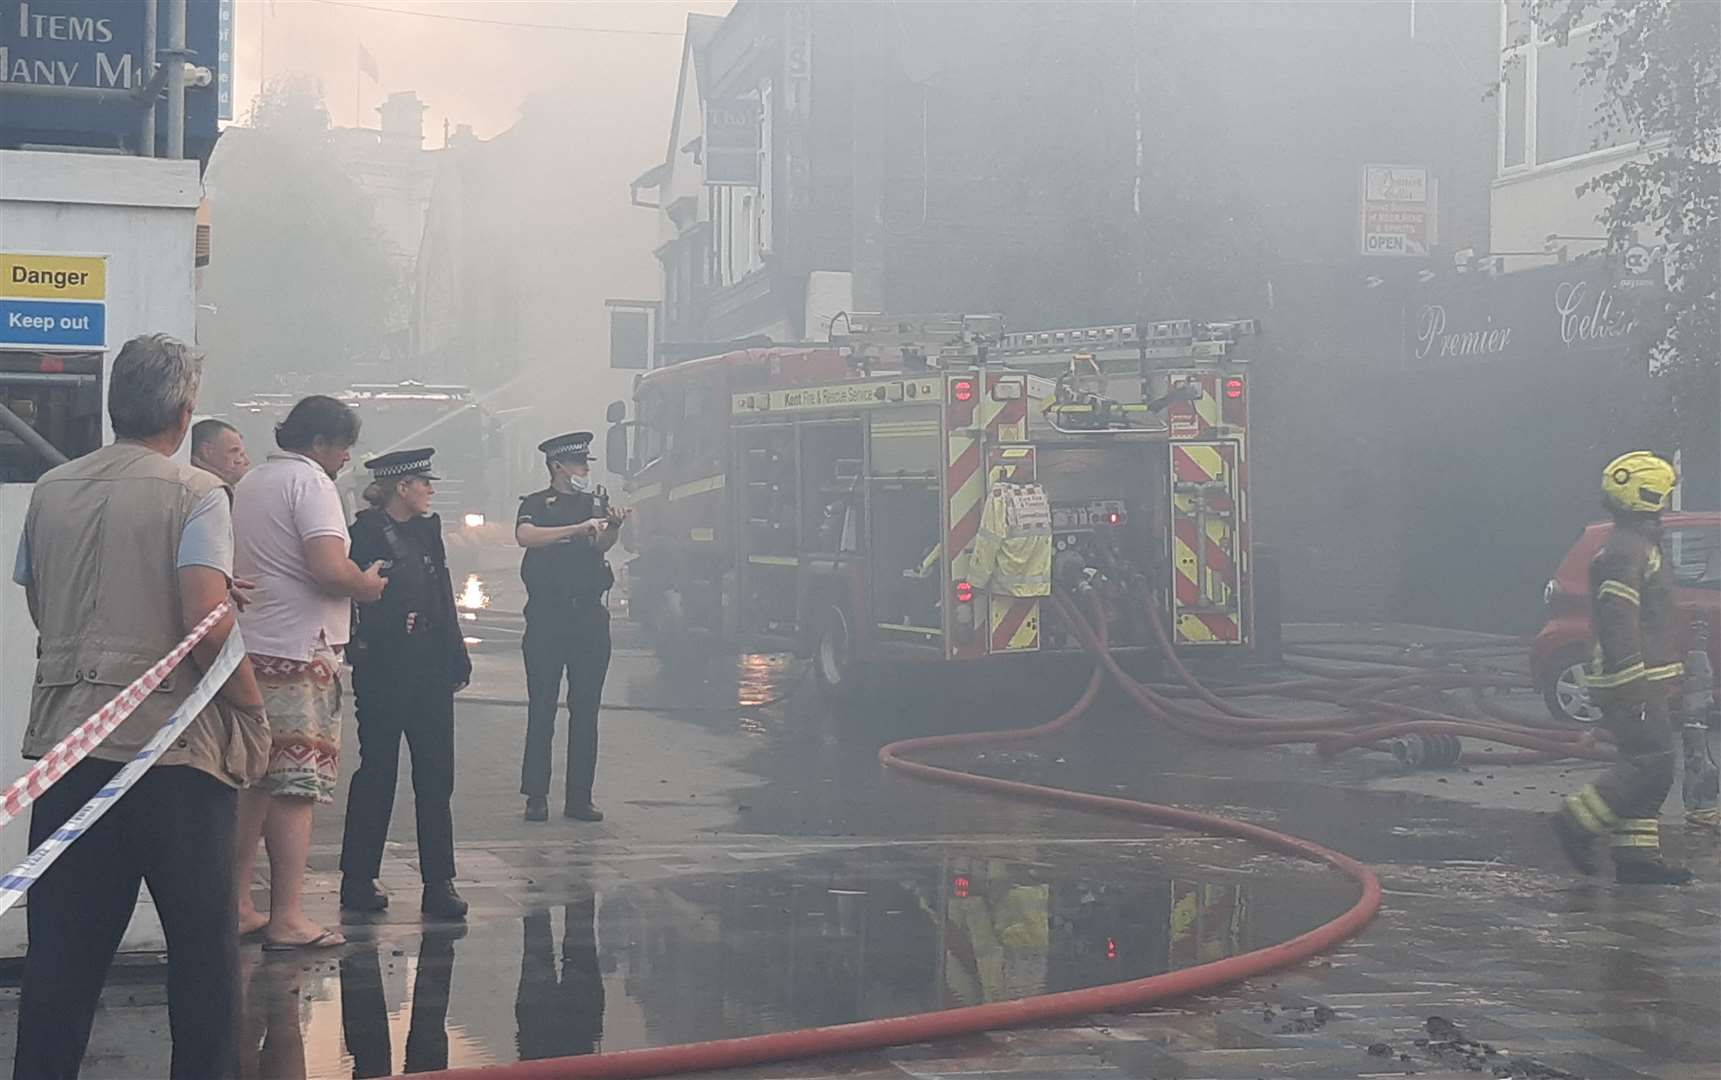 At its height, around 60 firefighters were at the scene